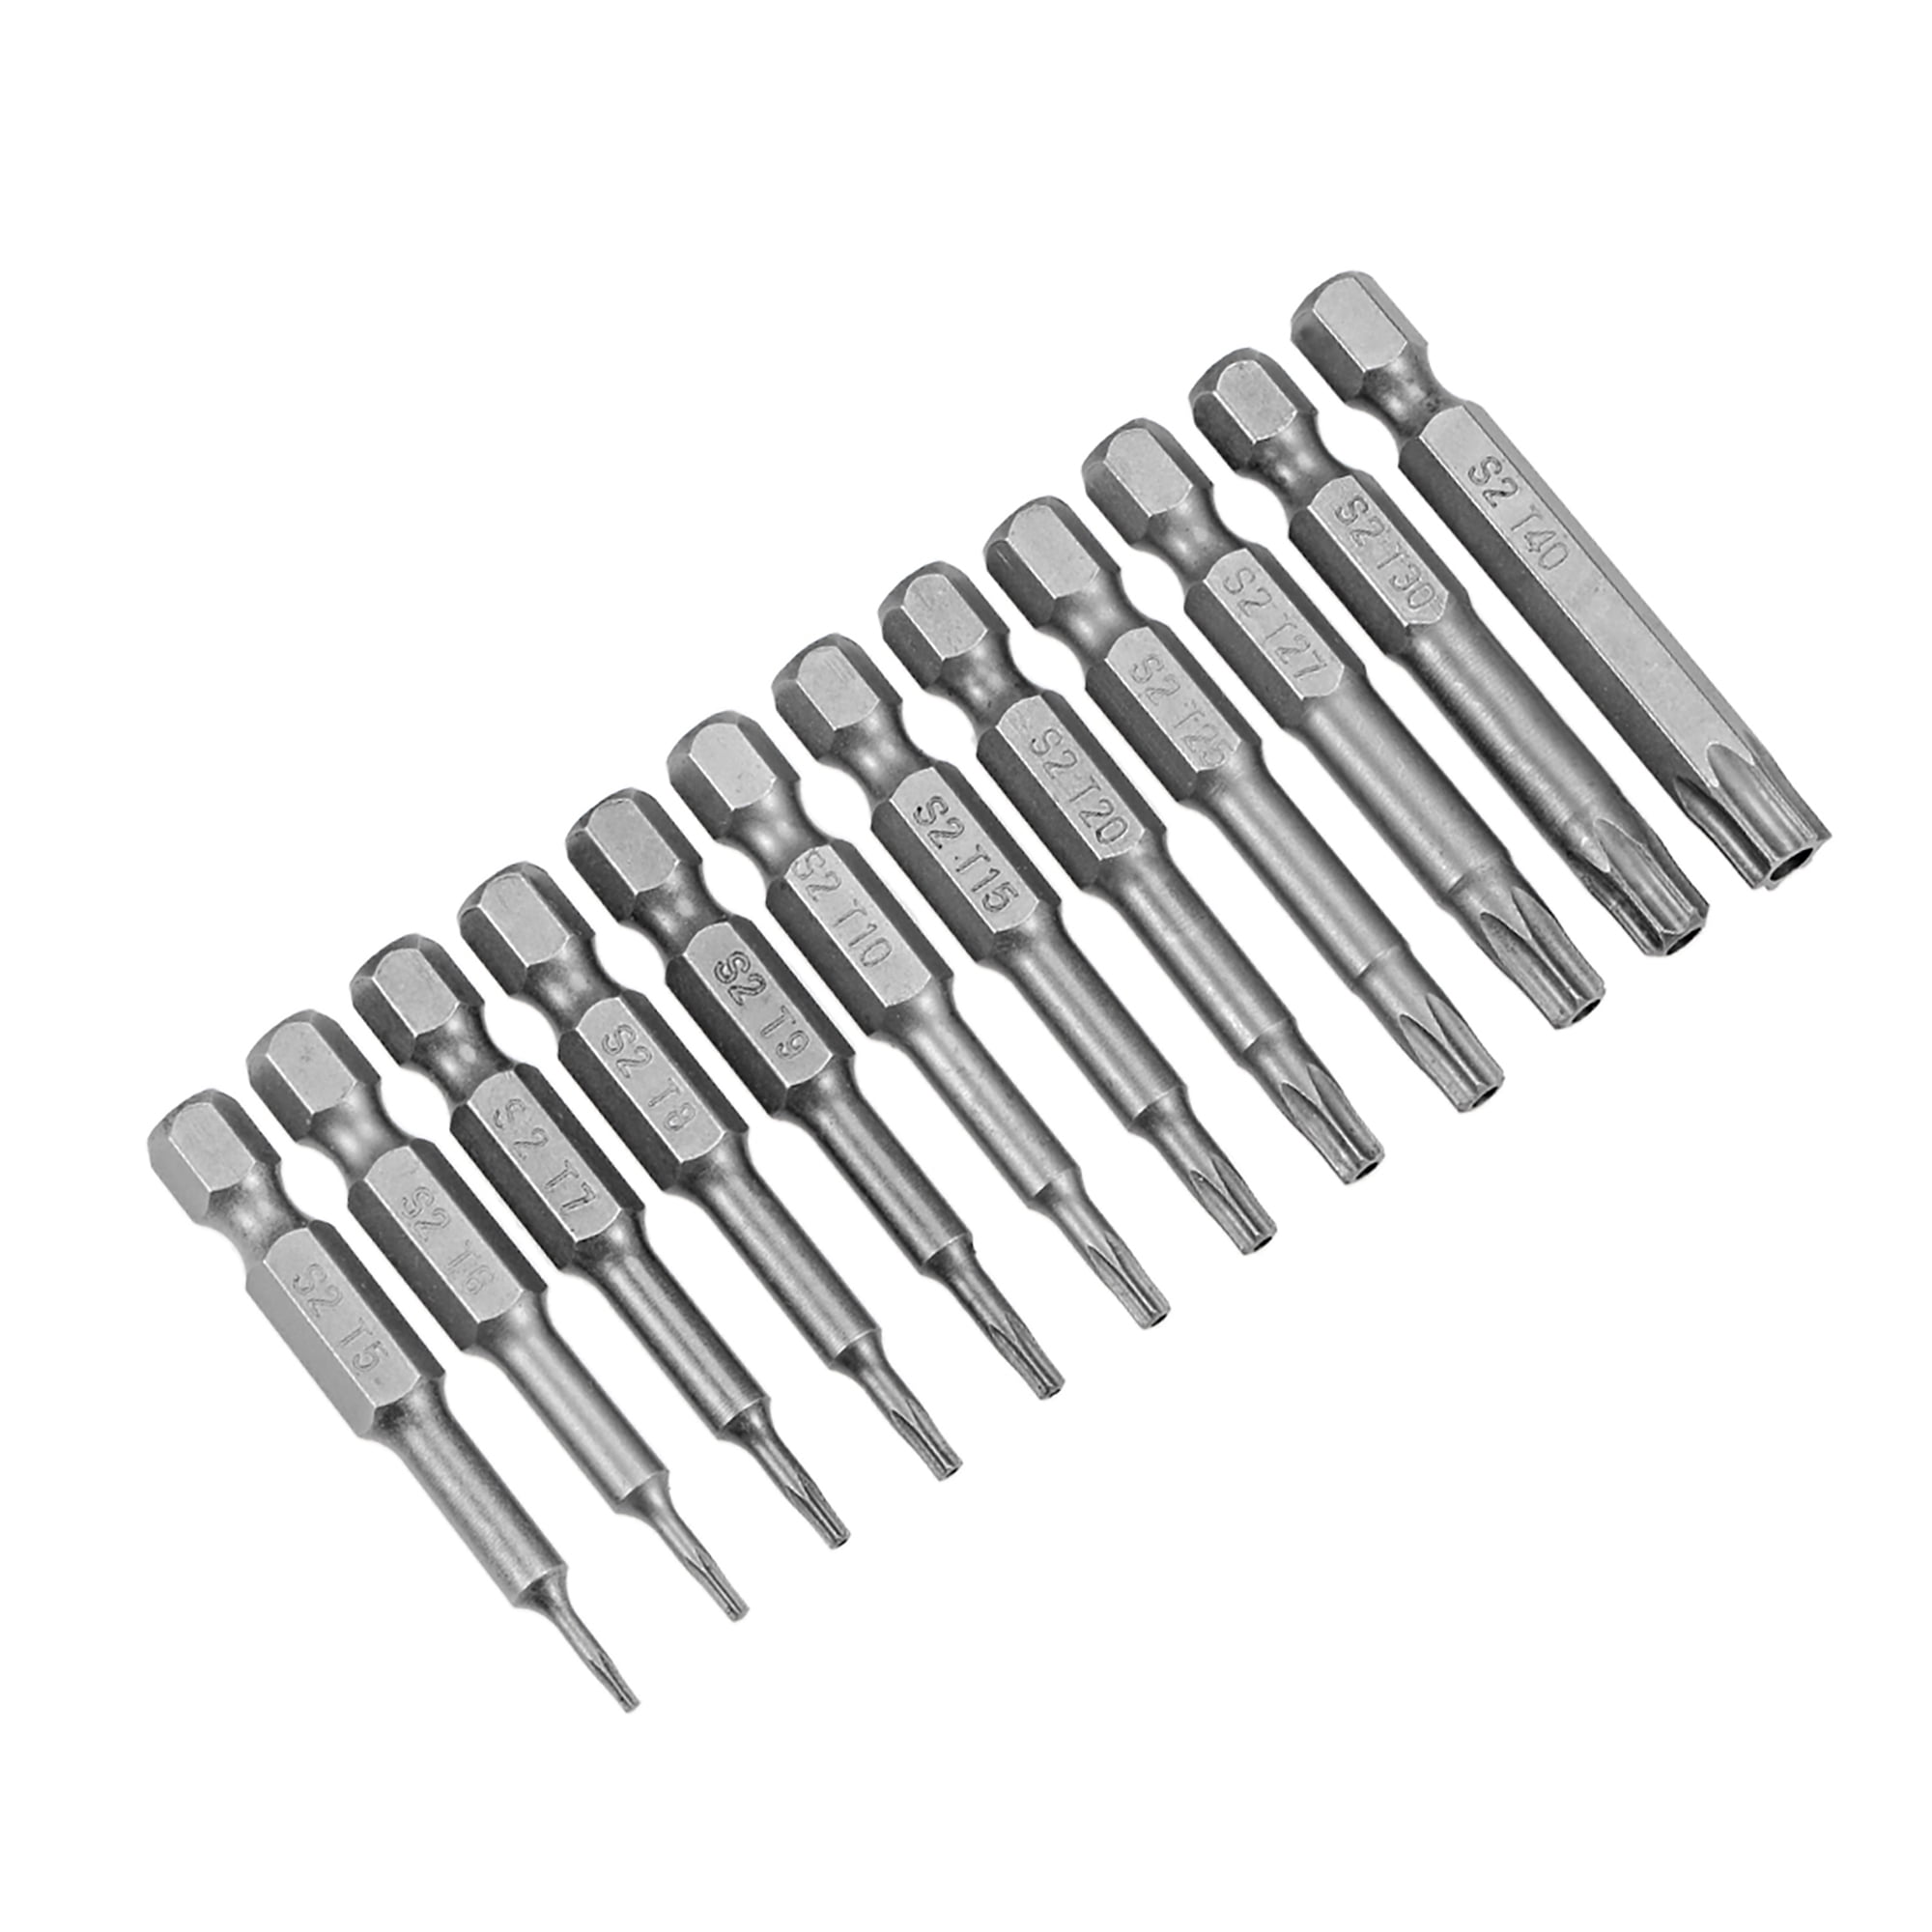 Round Shank Screwdriver Bits Hexagon Slotted Torx S2 Power Magnetic Drills 4mm 